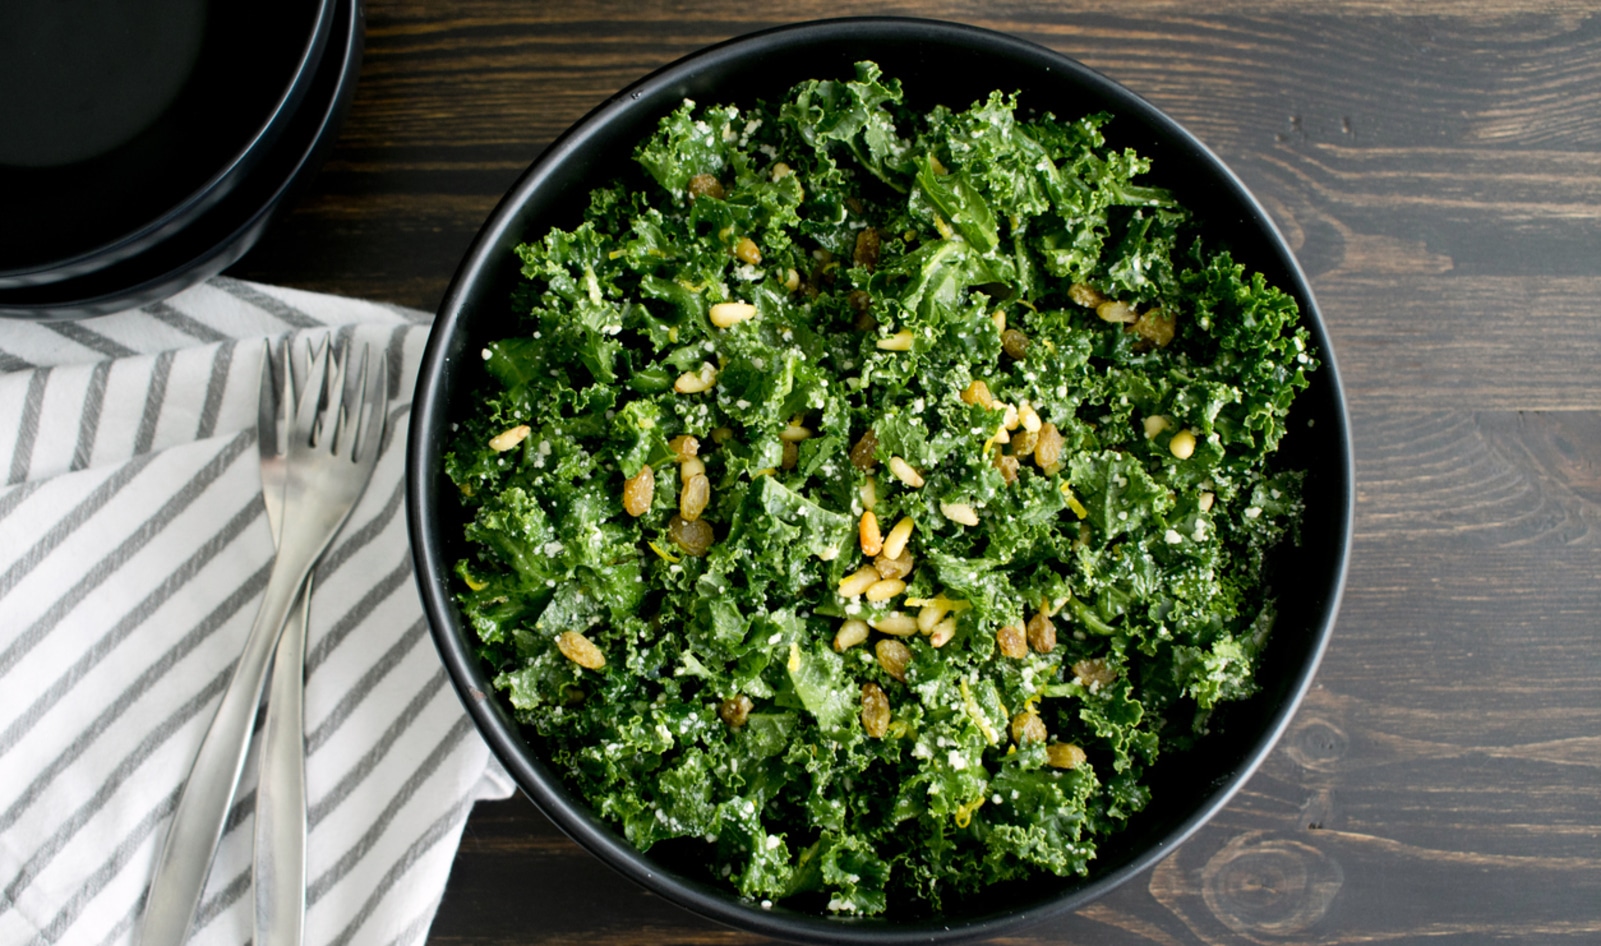 Study Finds PFAS in Kale. Should You Stop Eating It? Here's What You Need to Know